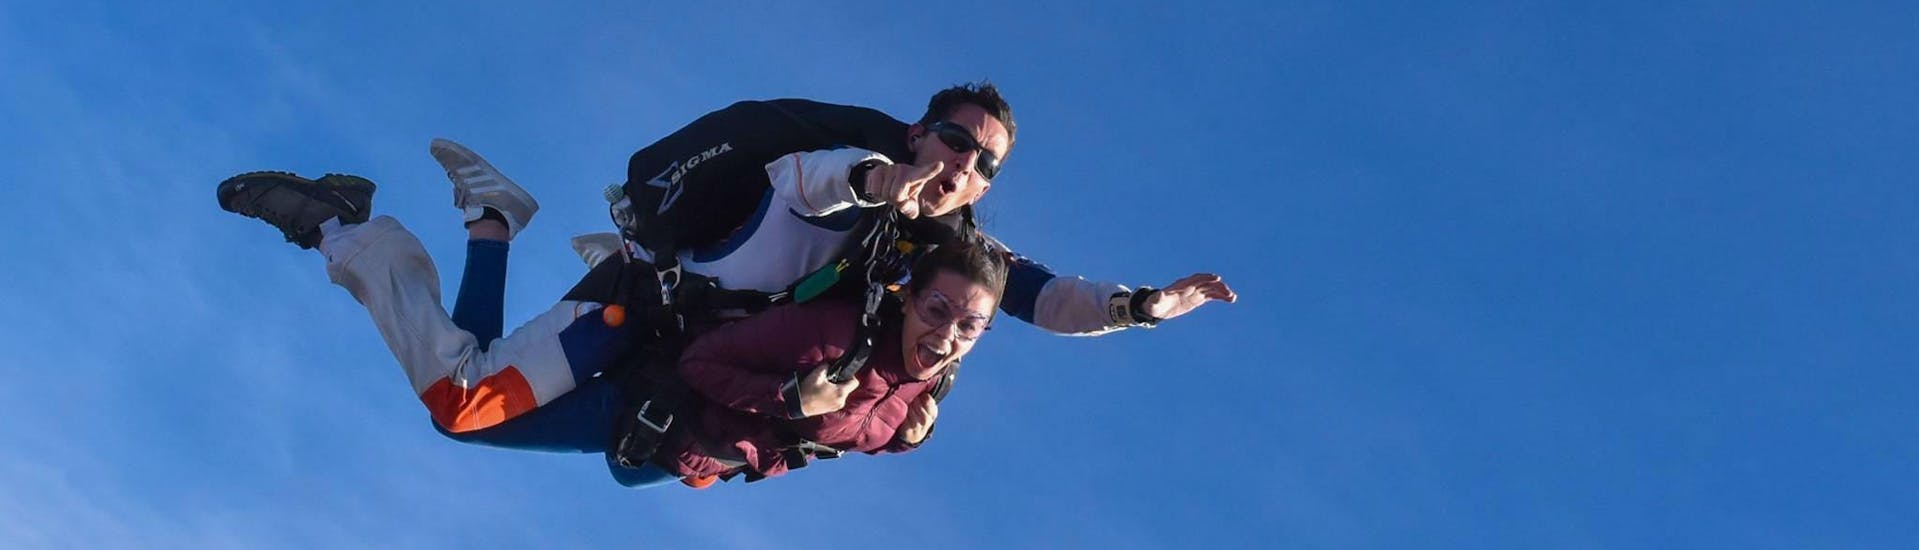 A tandem master from Skydive Center has jumped with a passenger off the plane at an altitude of 4000m and is free falling.